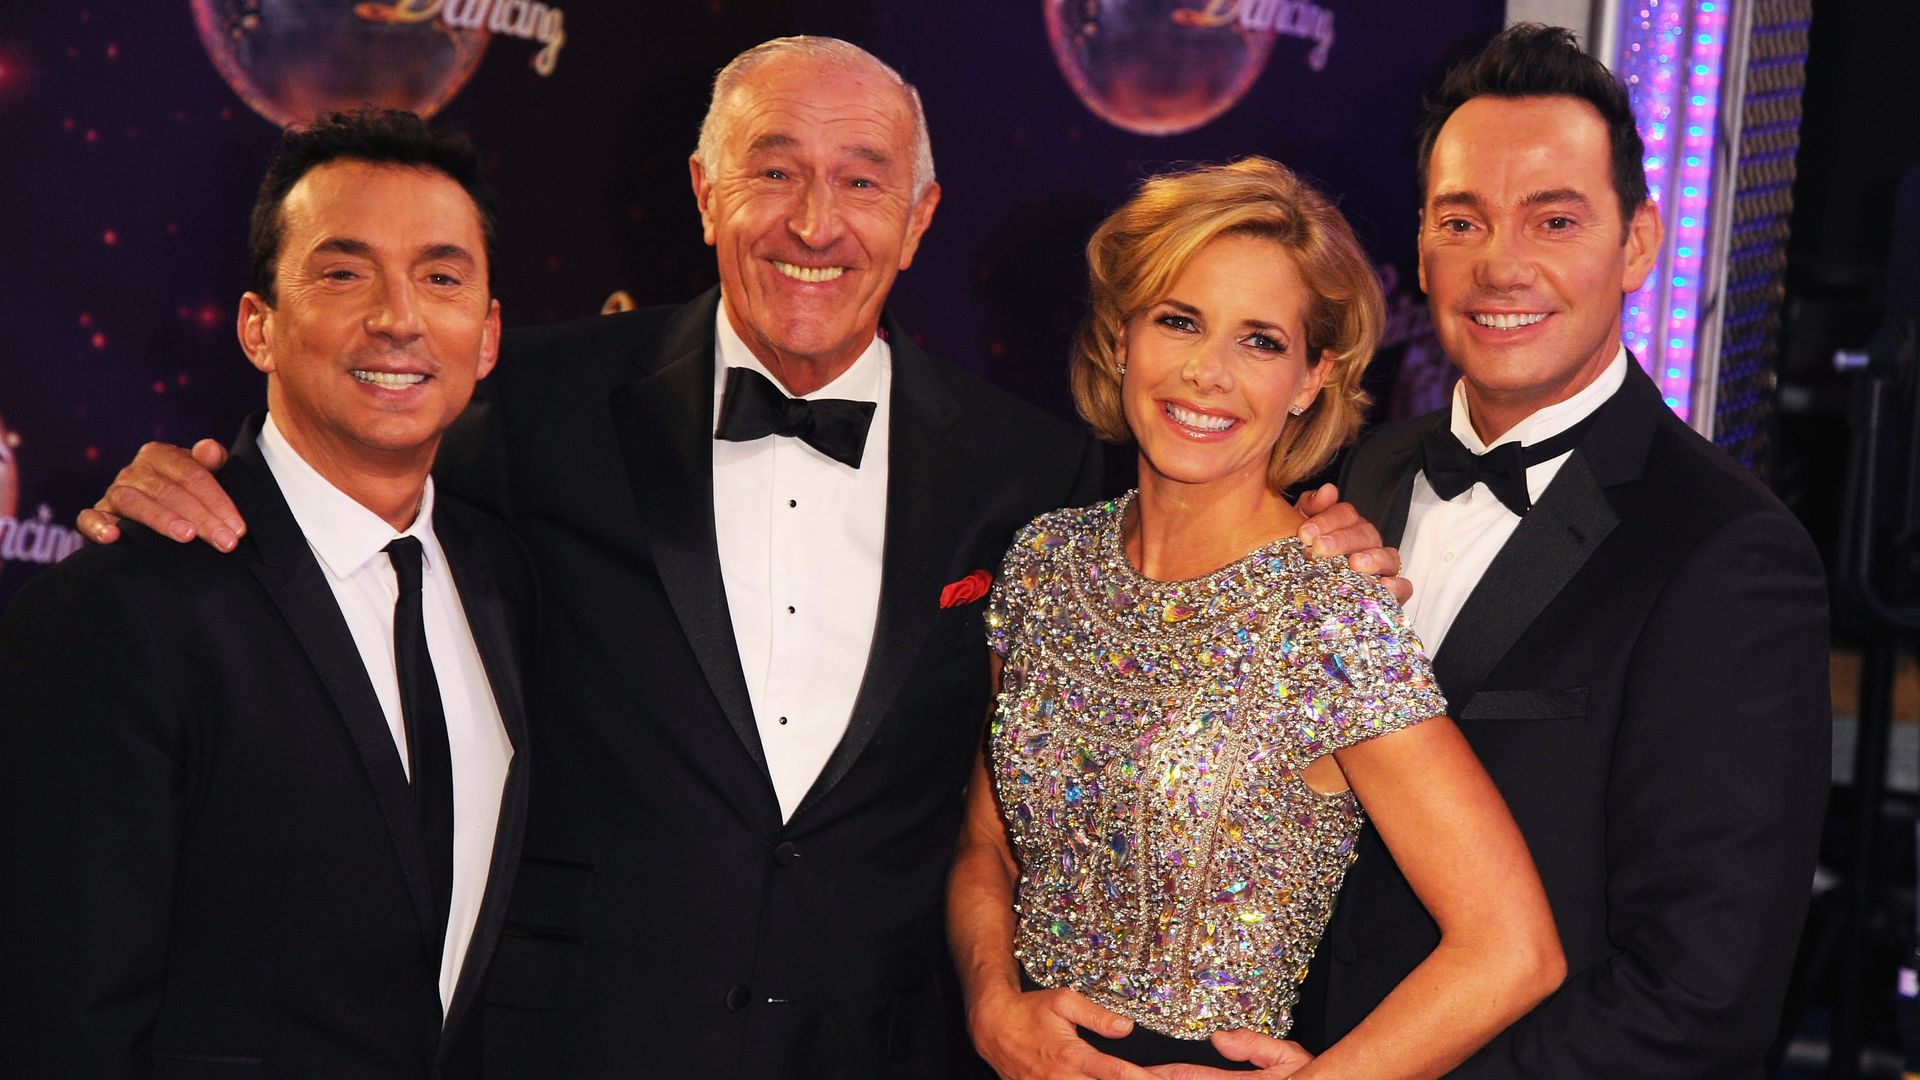 Len's former Strictly colleagues paid tribute to him